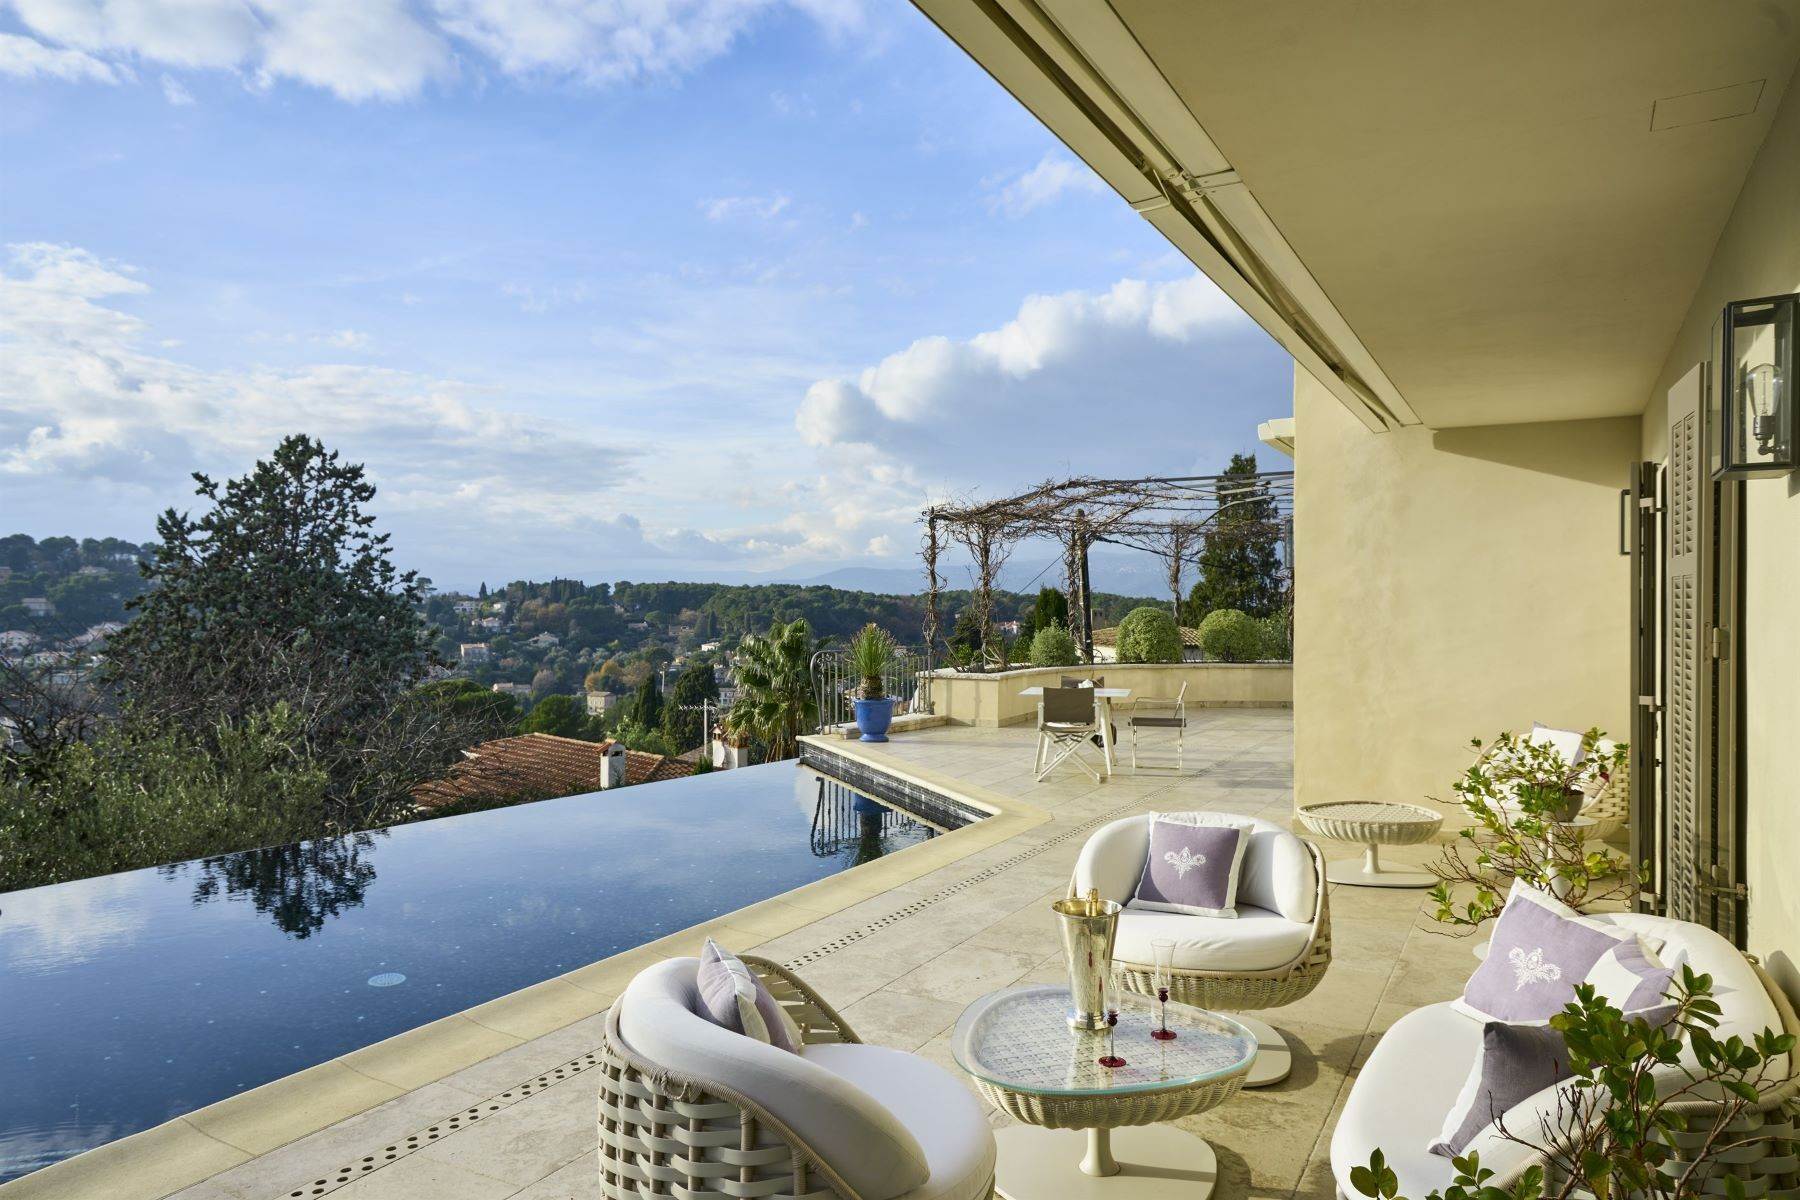 Single Family Homes for Sale at Prestigious Provencal-style property with 2 villas in Mougins Mougins, Provence-Alpes-Cote D'Azur 06250 France